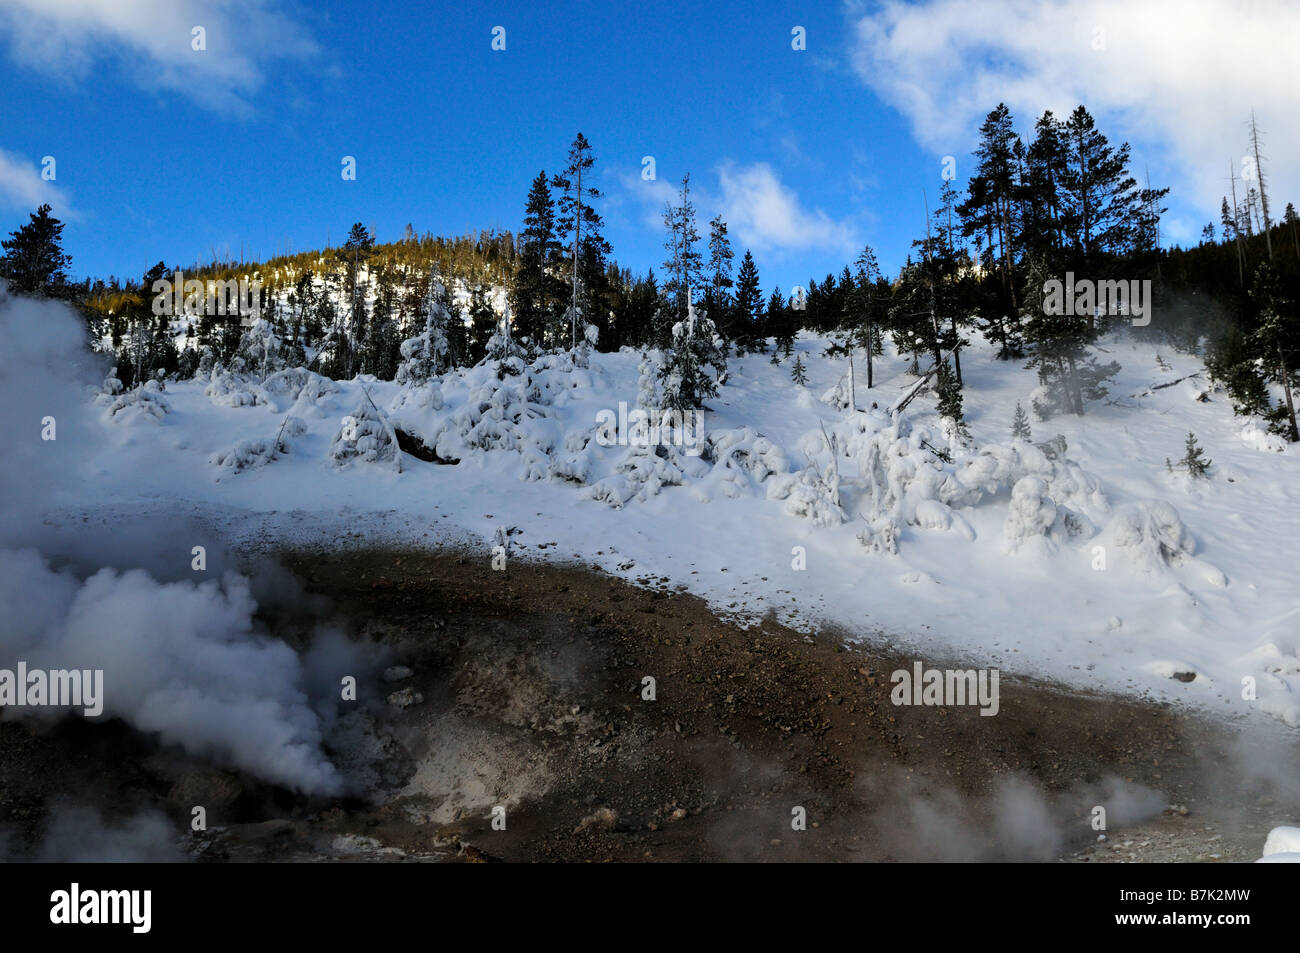 Fumarole in winter. The Yellowstone National Park, Wyoming, USA. Stock Photo